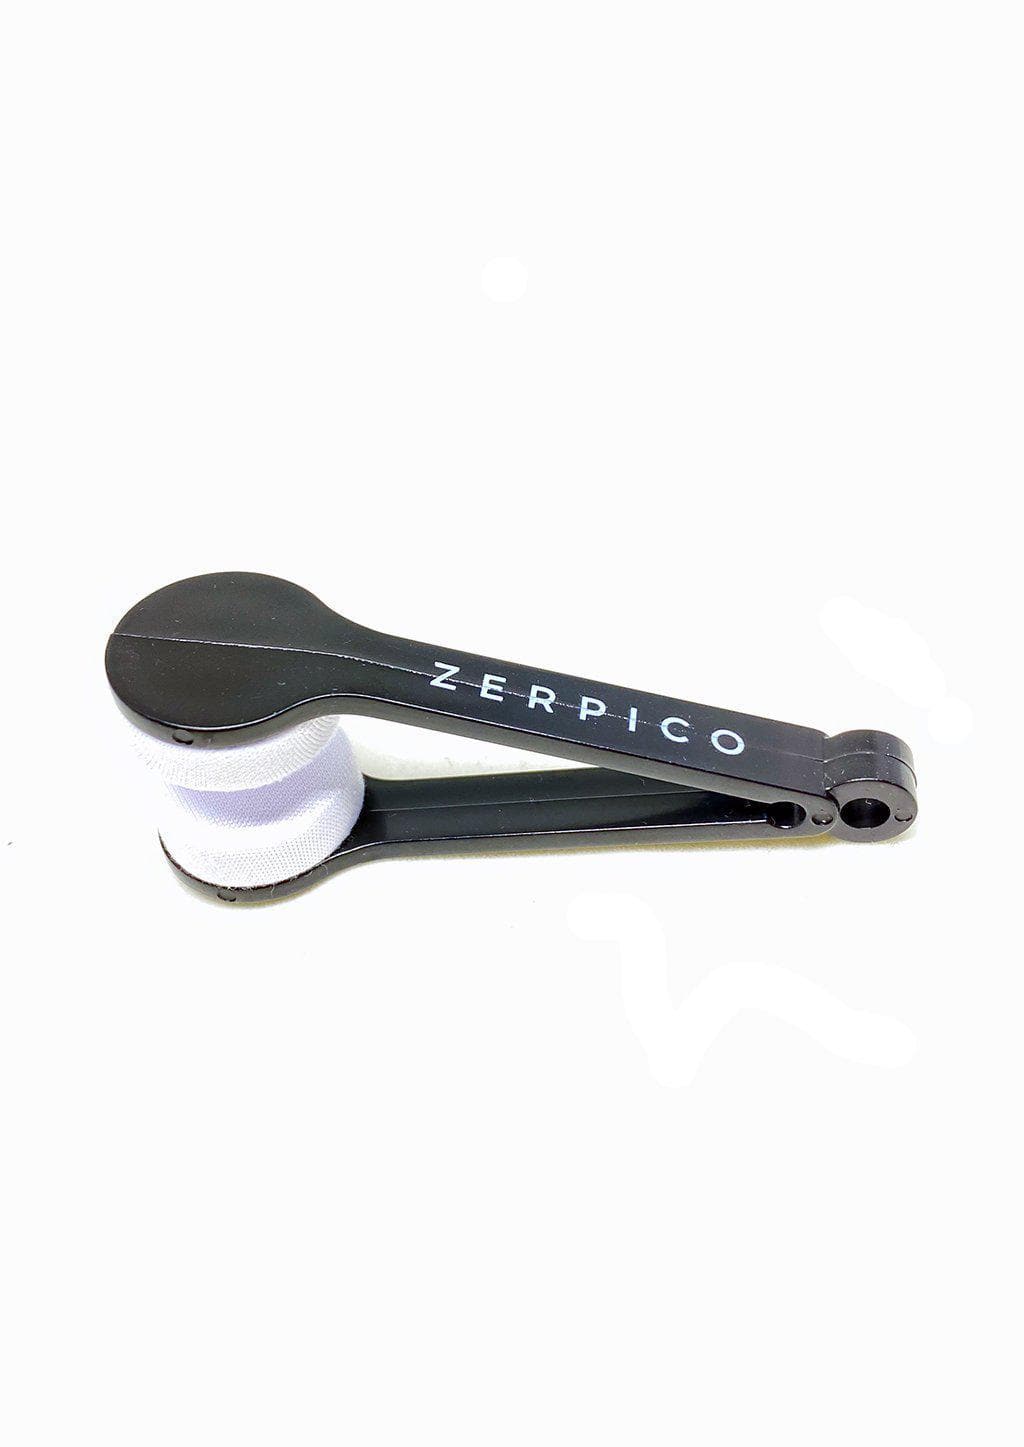 Portable cleaning for glasses and sunglasses from Zerpico.